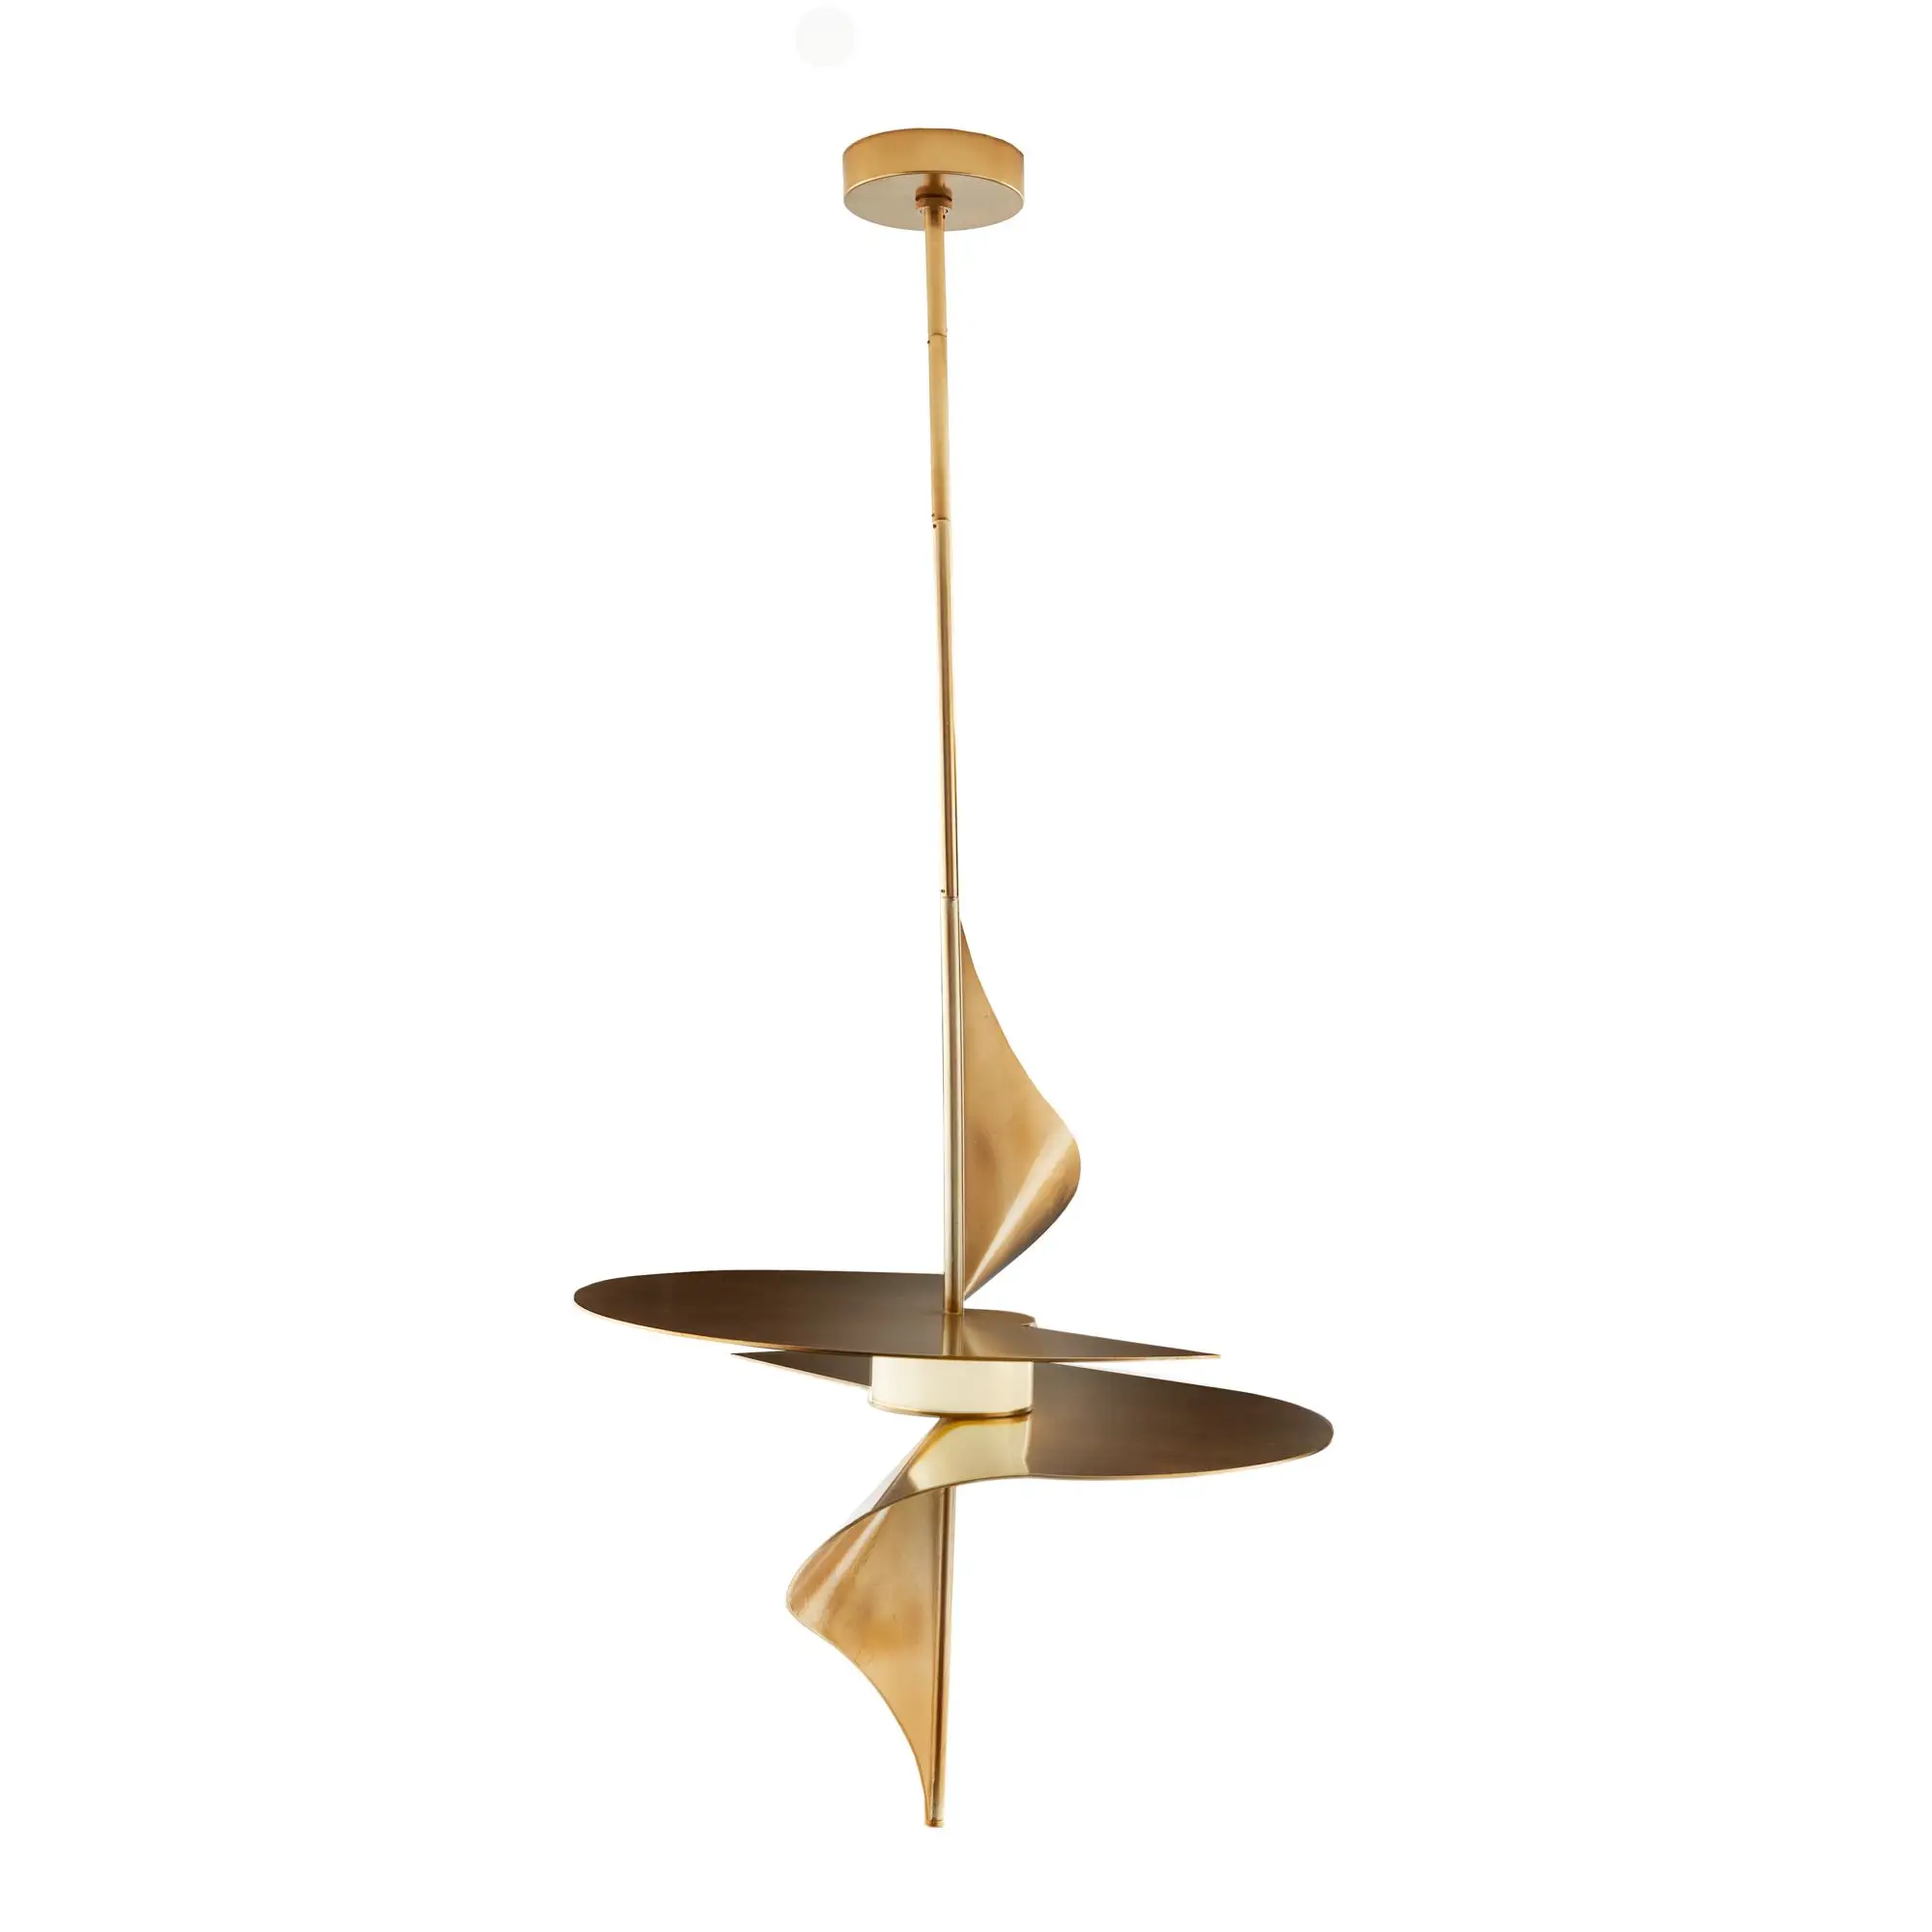 Pendant lamp RENLY by Arteriors